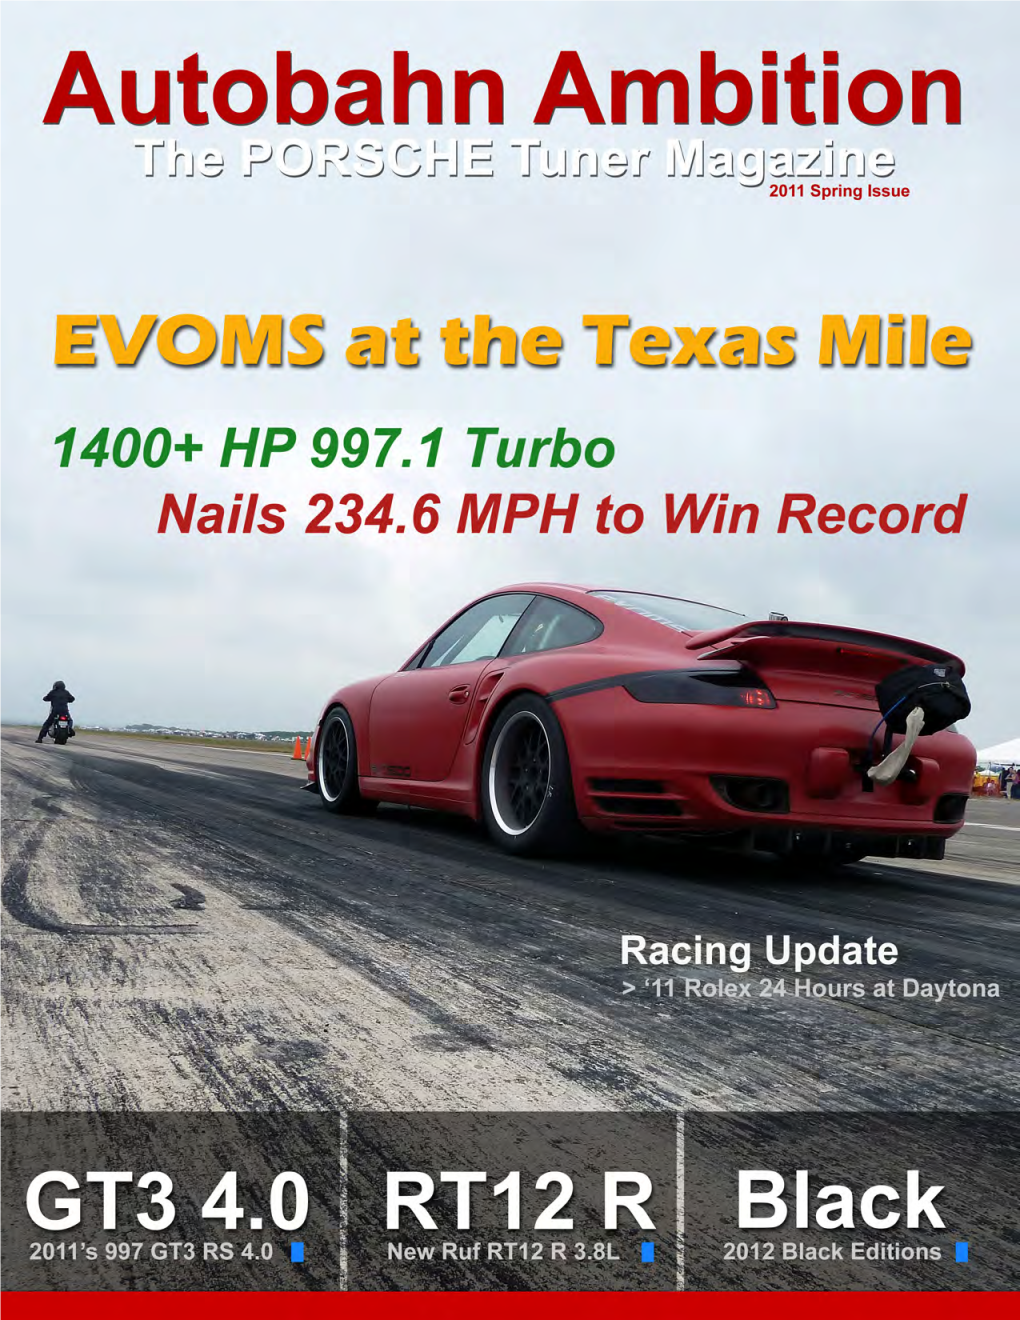 EVOMS “Mayhem” 997.1 Turbo at the Texas Mile >> Article By: Kevin Sims & Photos By: EVOMS